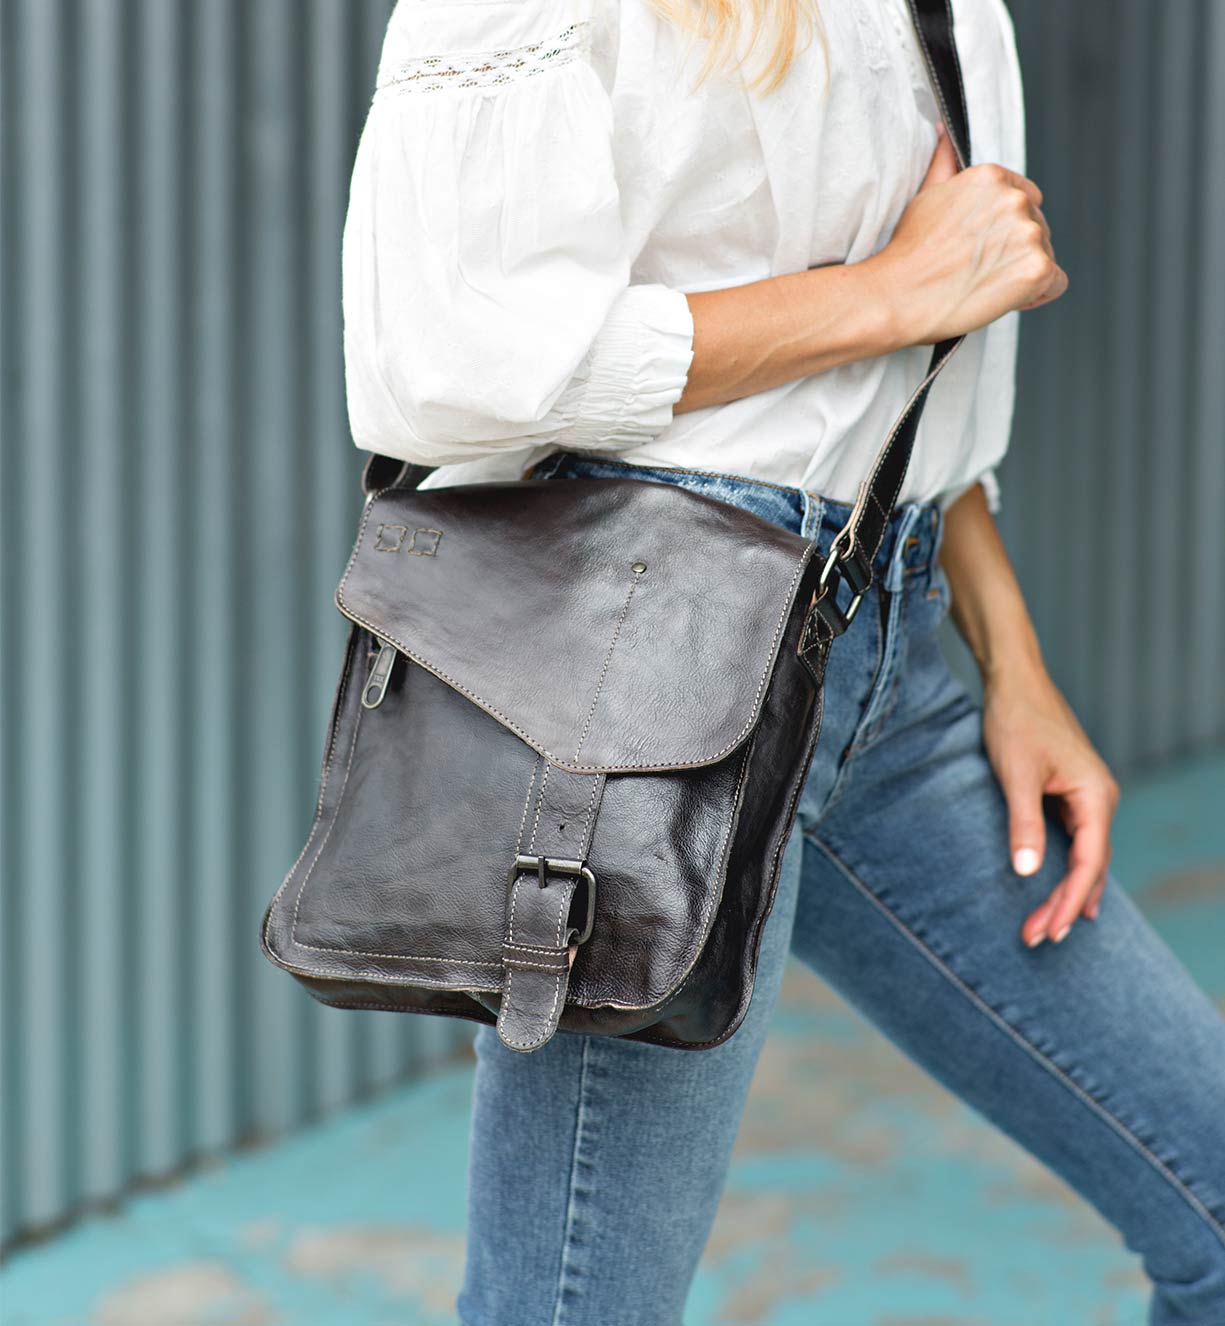 A woman wearing a white shirt and jeans holding a Bed Stu Venice Beach black leather bag.